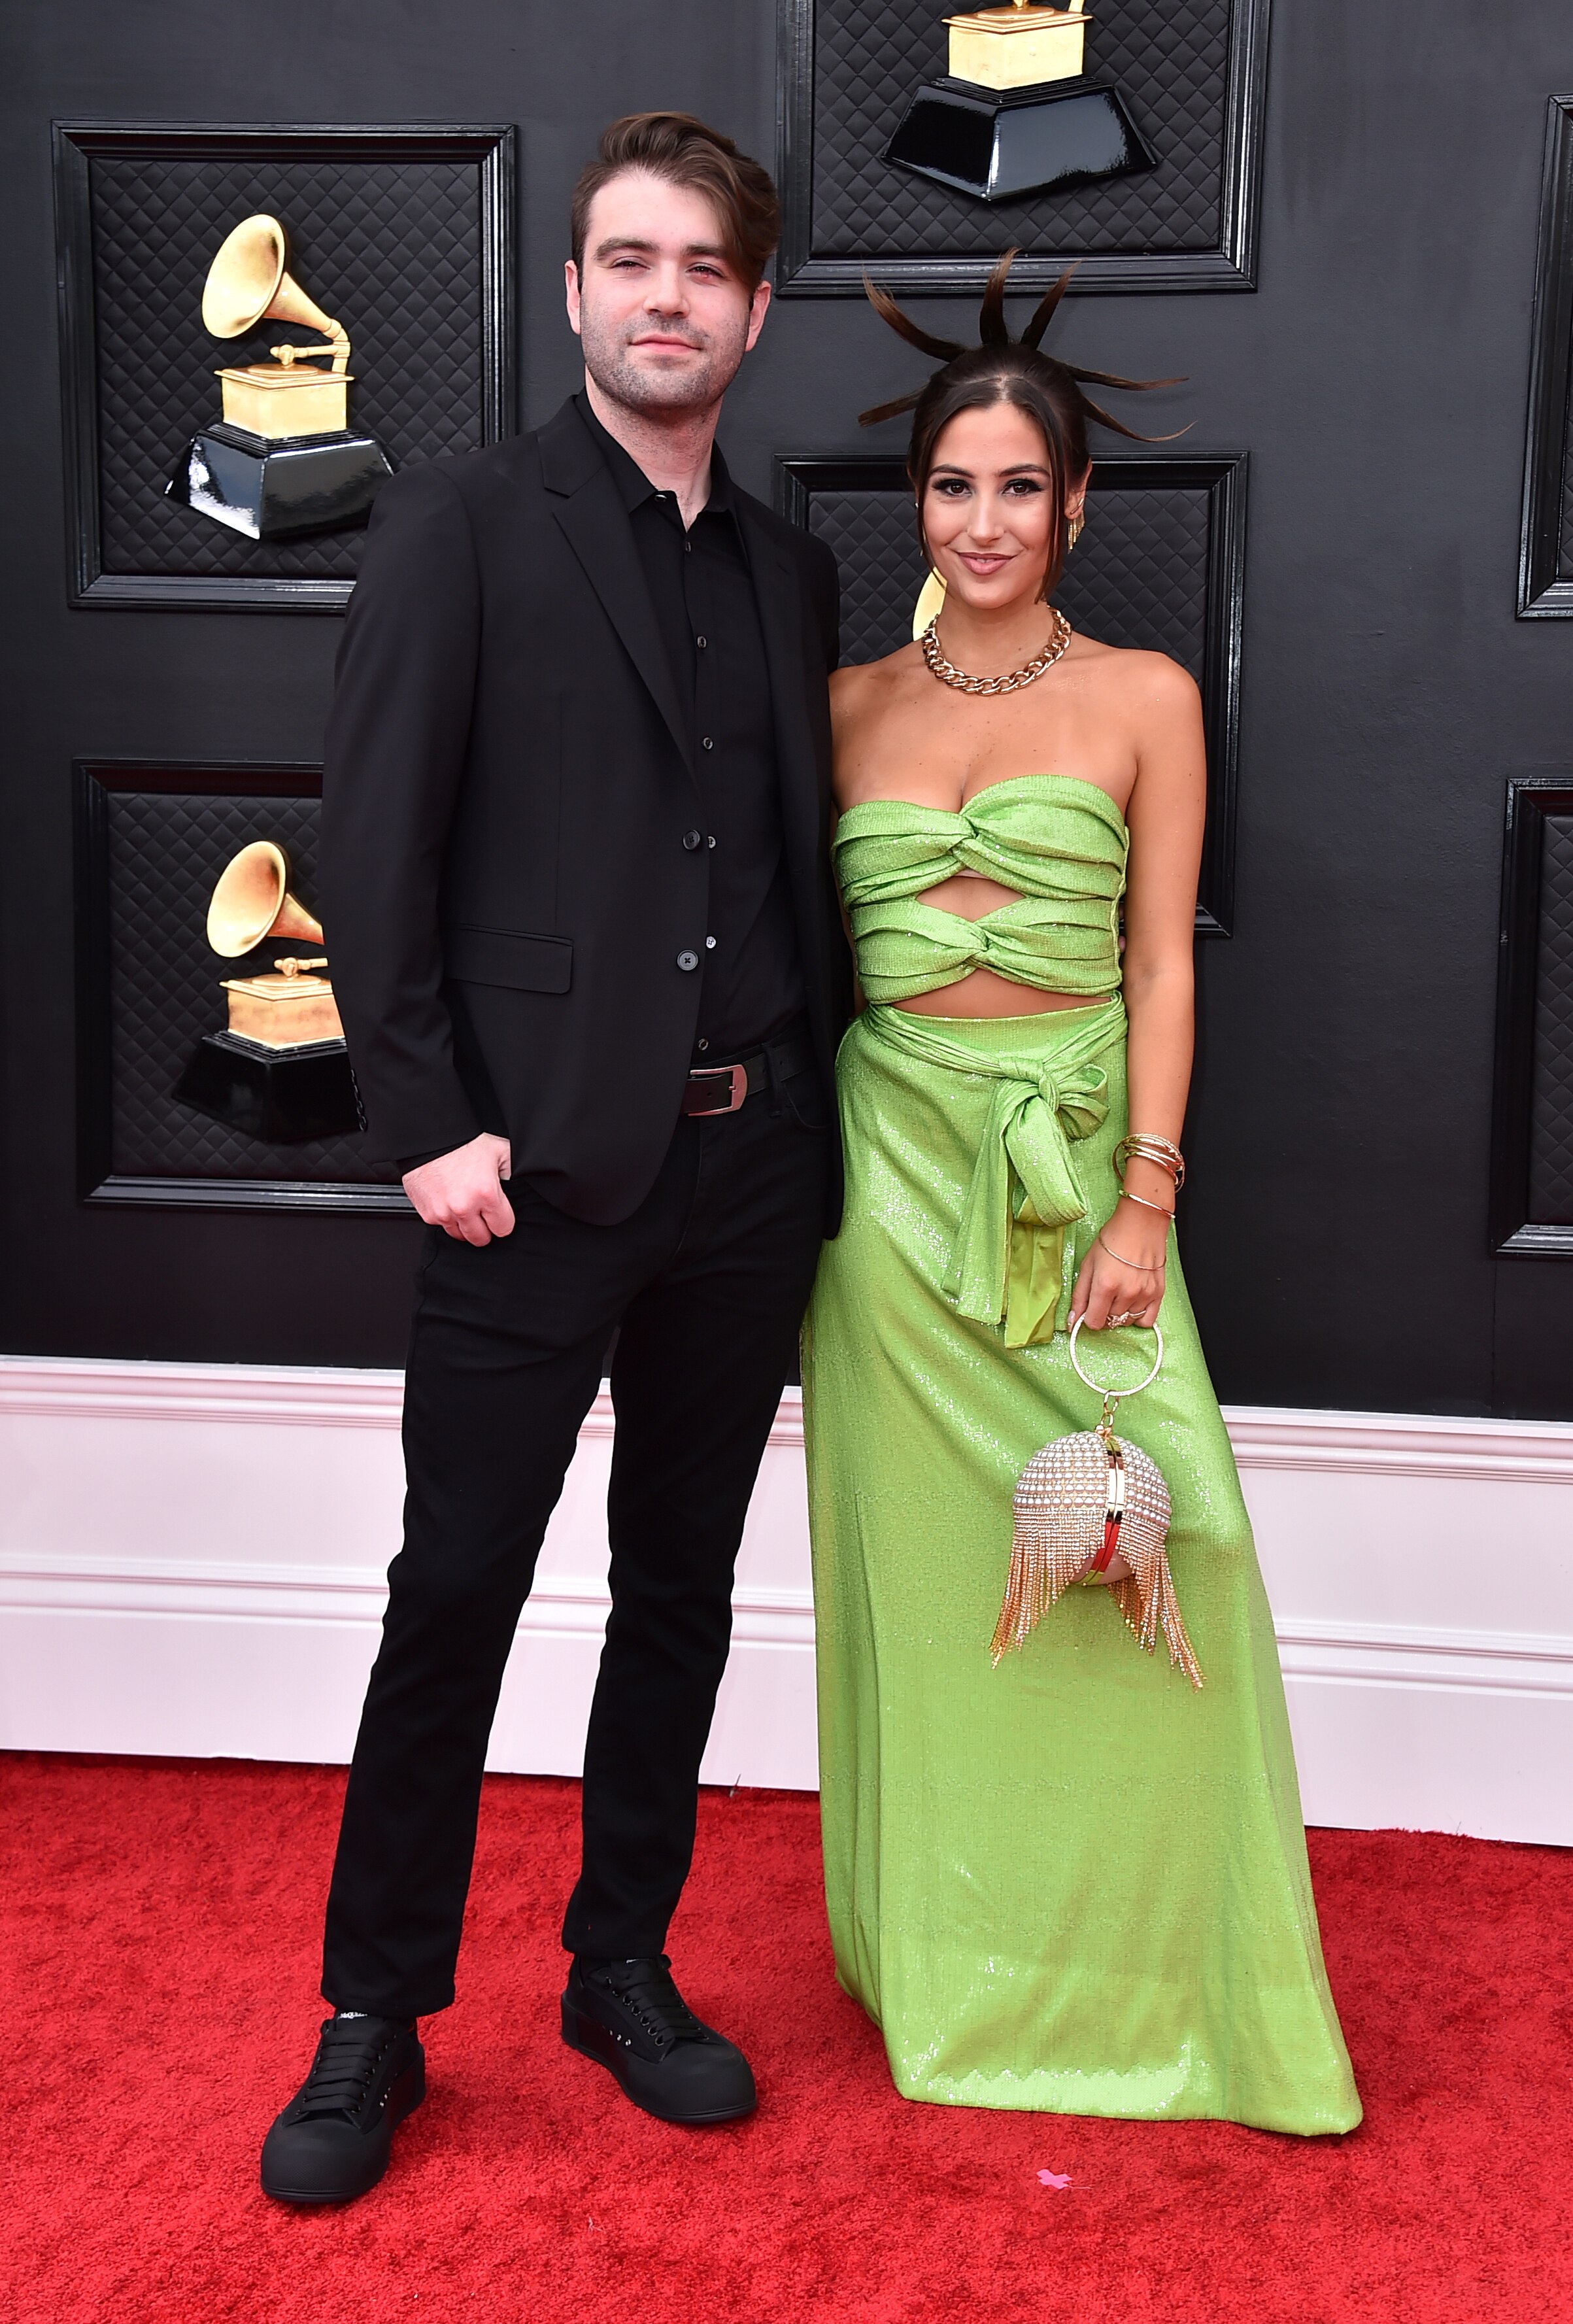 Jake Torrey and Tia Tia stand arm in arm on the grammy red carpet. Tia Tia has her hair spiked up in six spikes 